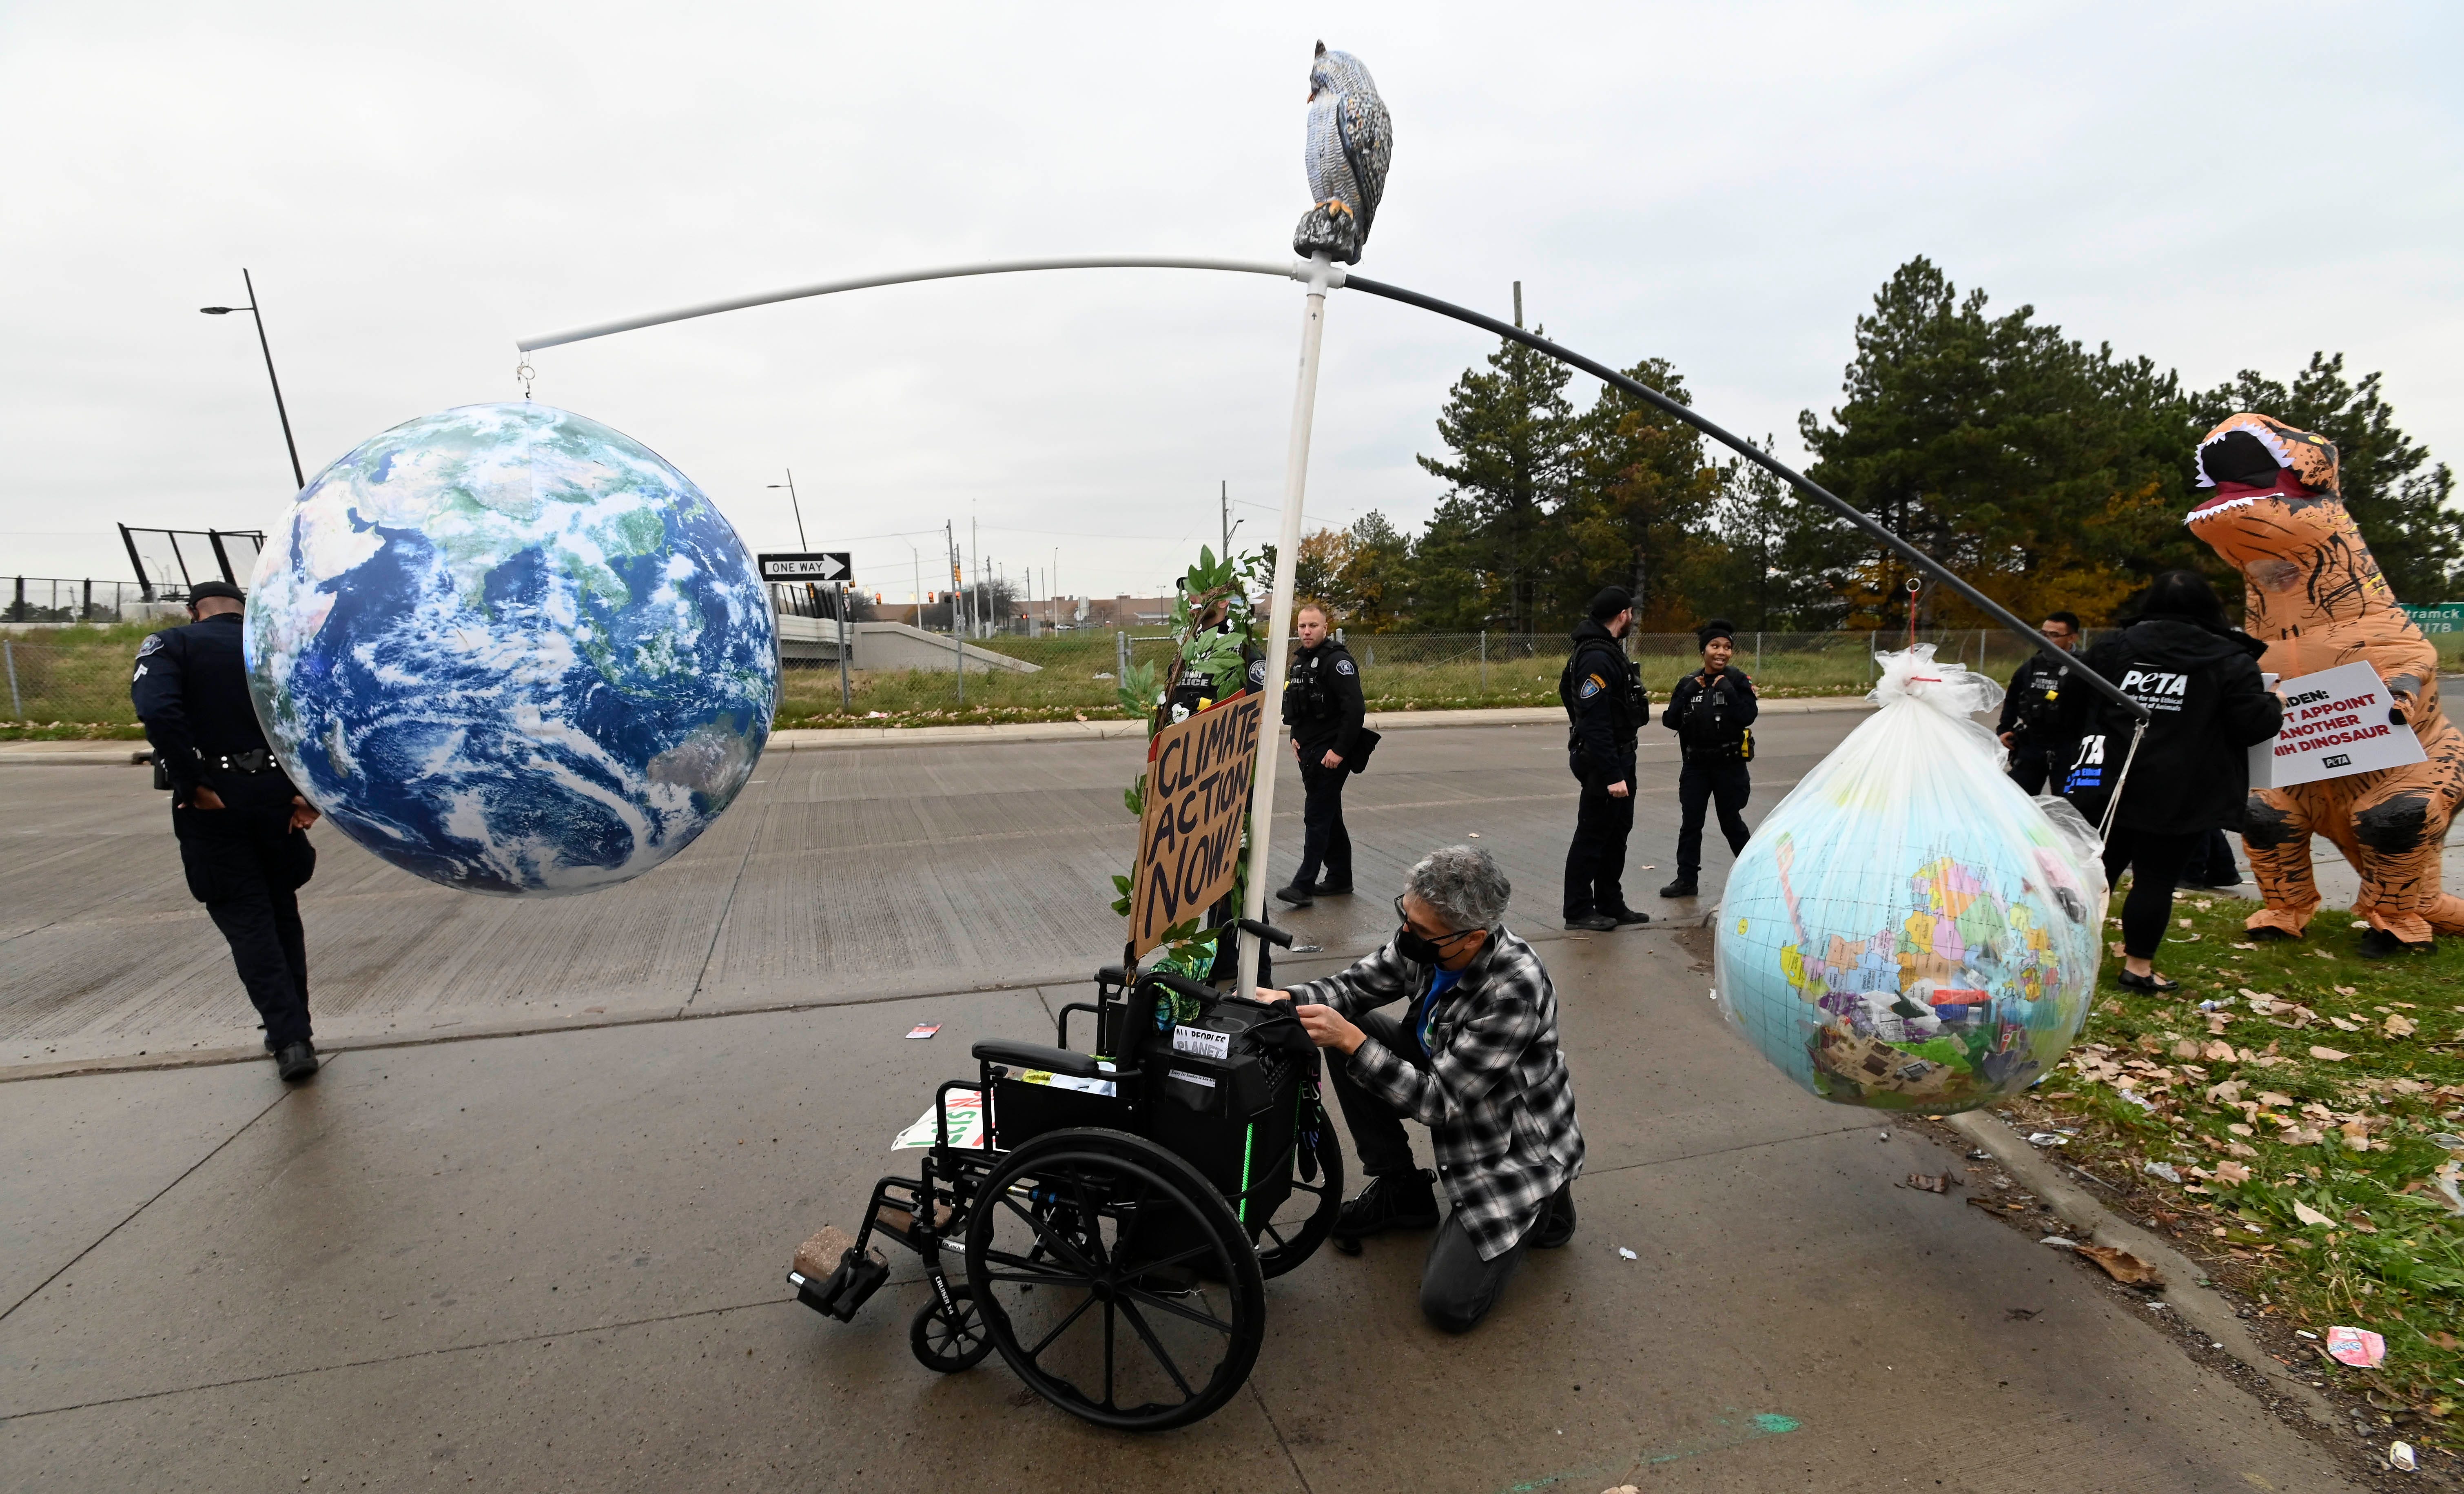 Oil & Water Don't Mix Keep Oil Out of the Great Lakes member John Donabedian, of Livonia, put final touches on his Earthella Mobile display that represents the polarity of the natural world, left, and the man-made world, right, in the trash bag, Wednesday afternoon, November 17, 2021. 
Members of Oil & Water Don't Mix Keep Oil Out of the Great Lakes and others protest Enbridge's twin Line 5 oil pipelines in the Straits of Mackinac before President Joe Biden tours the GM Factory ZERO in Detroit.